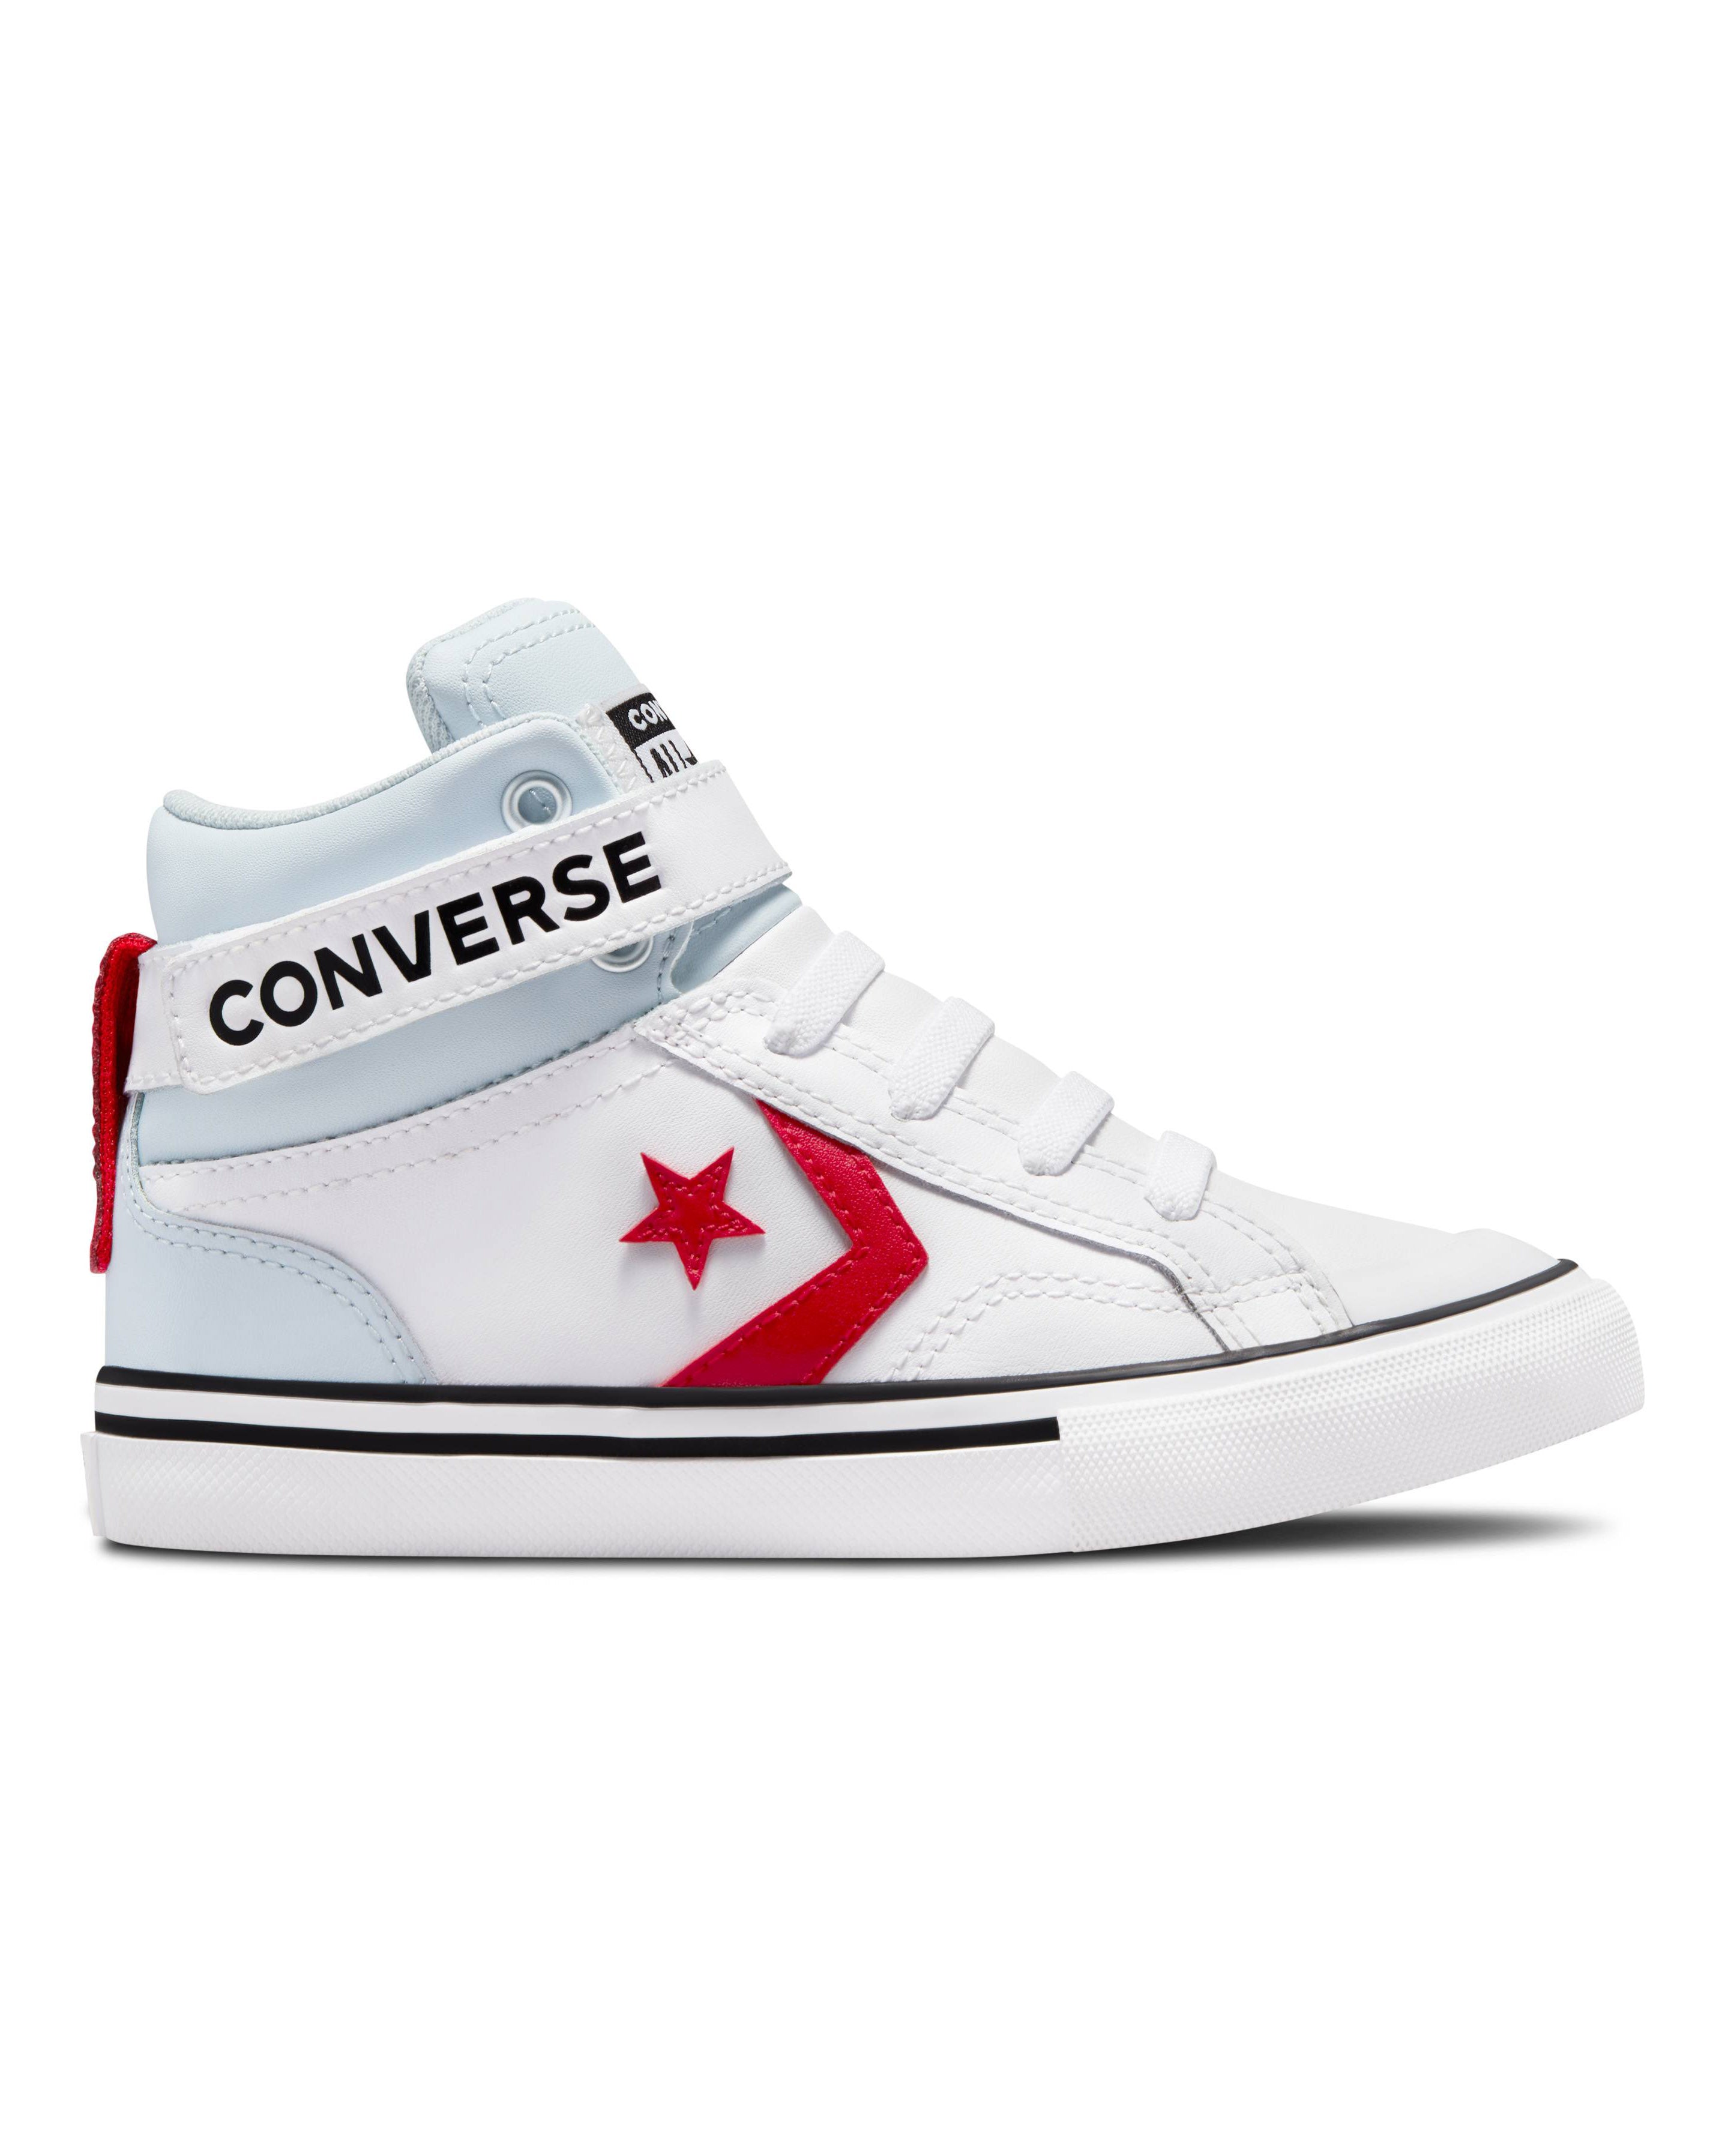 Converse Chuck Taylor All Star Infant & Kid Pro Blaze Retro Sport Hi - White/Ghosted/Red